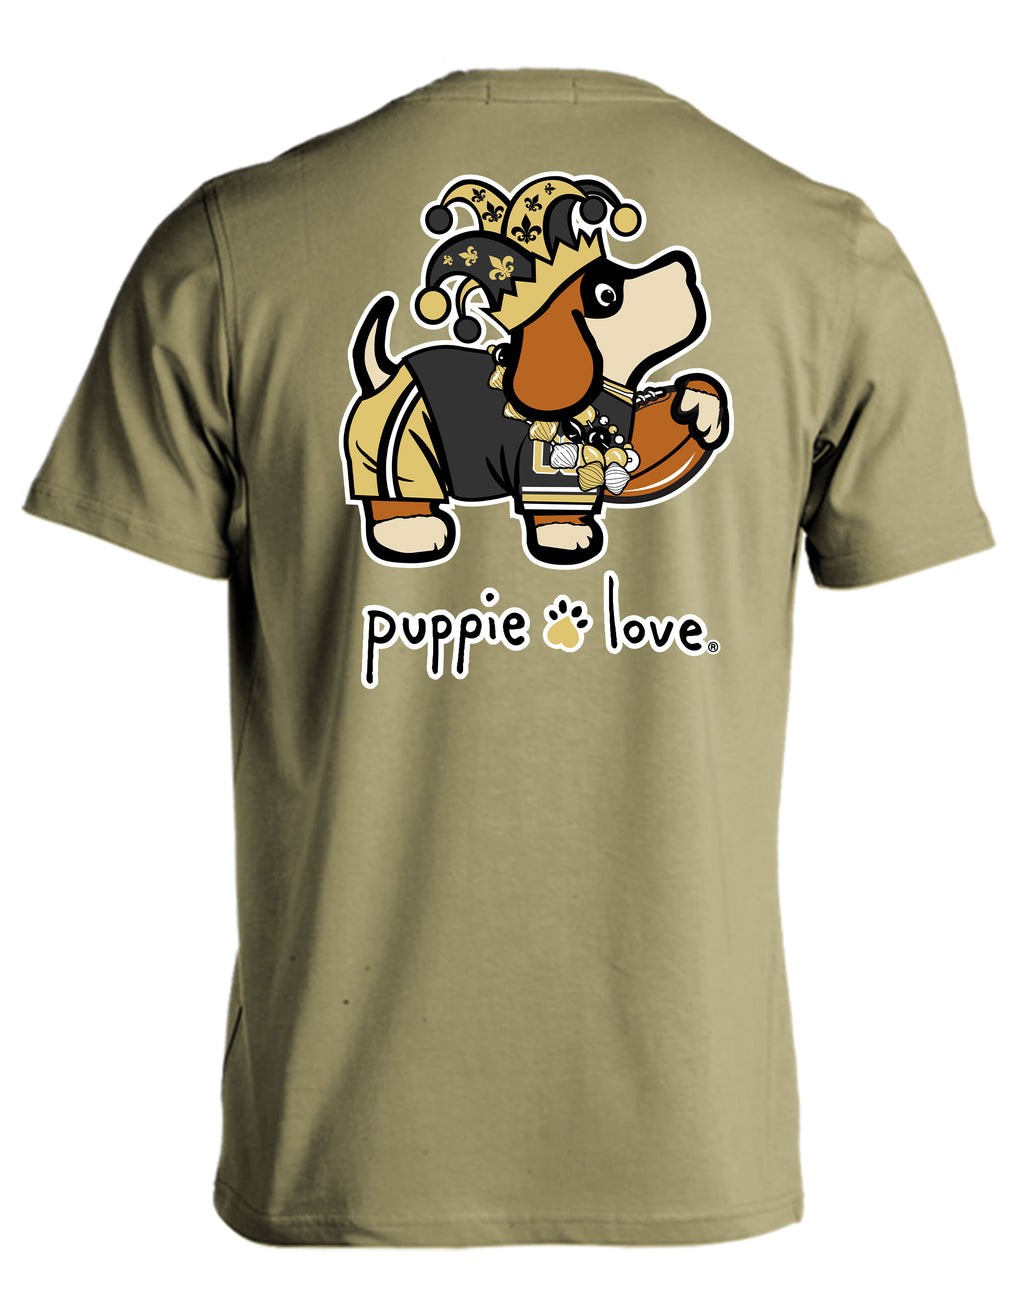 OLD GOLD AND BLACK MASCOT PUP - Puppie Love